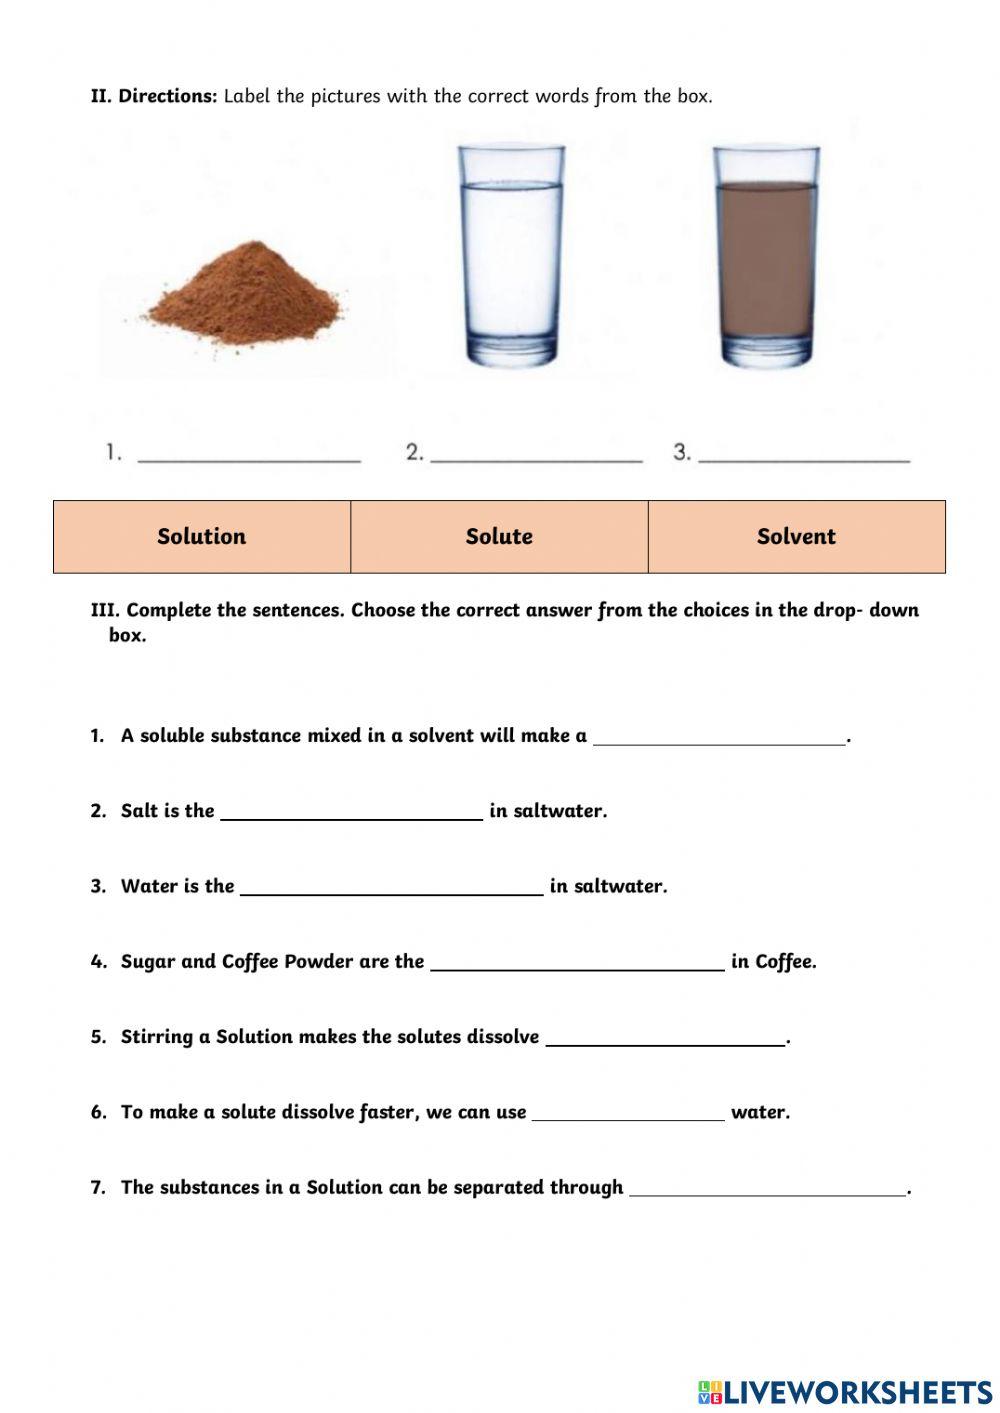 Solutions- How we make solids dissolve faster?